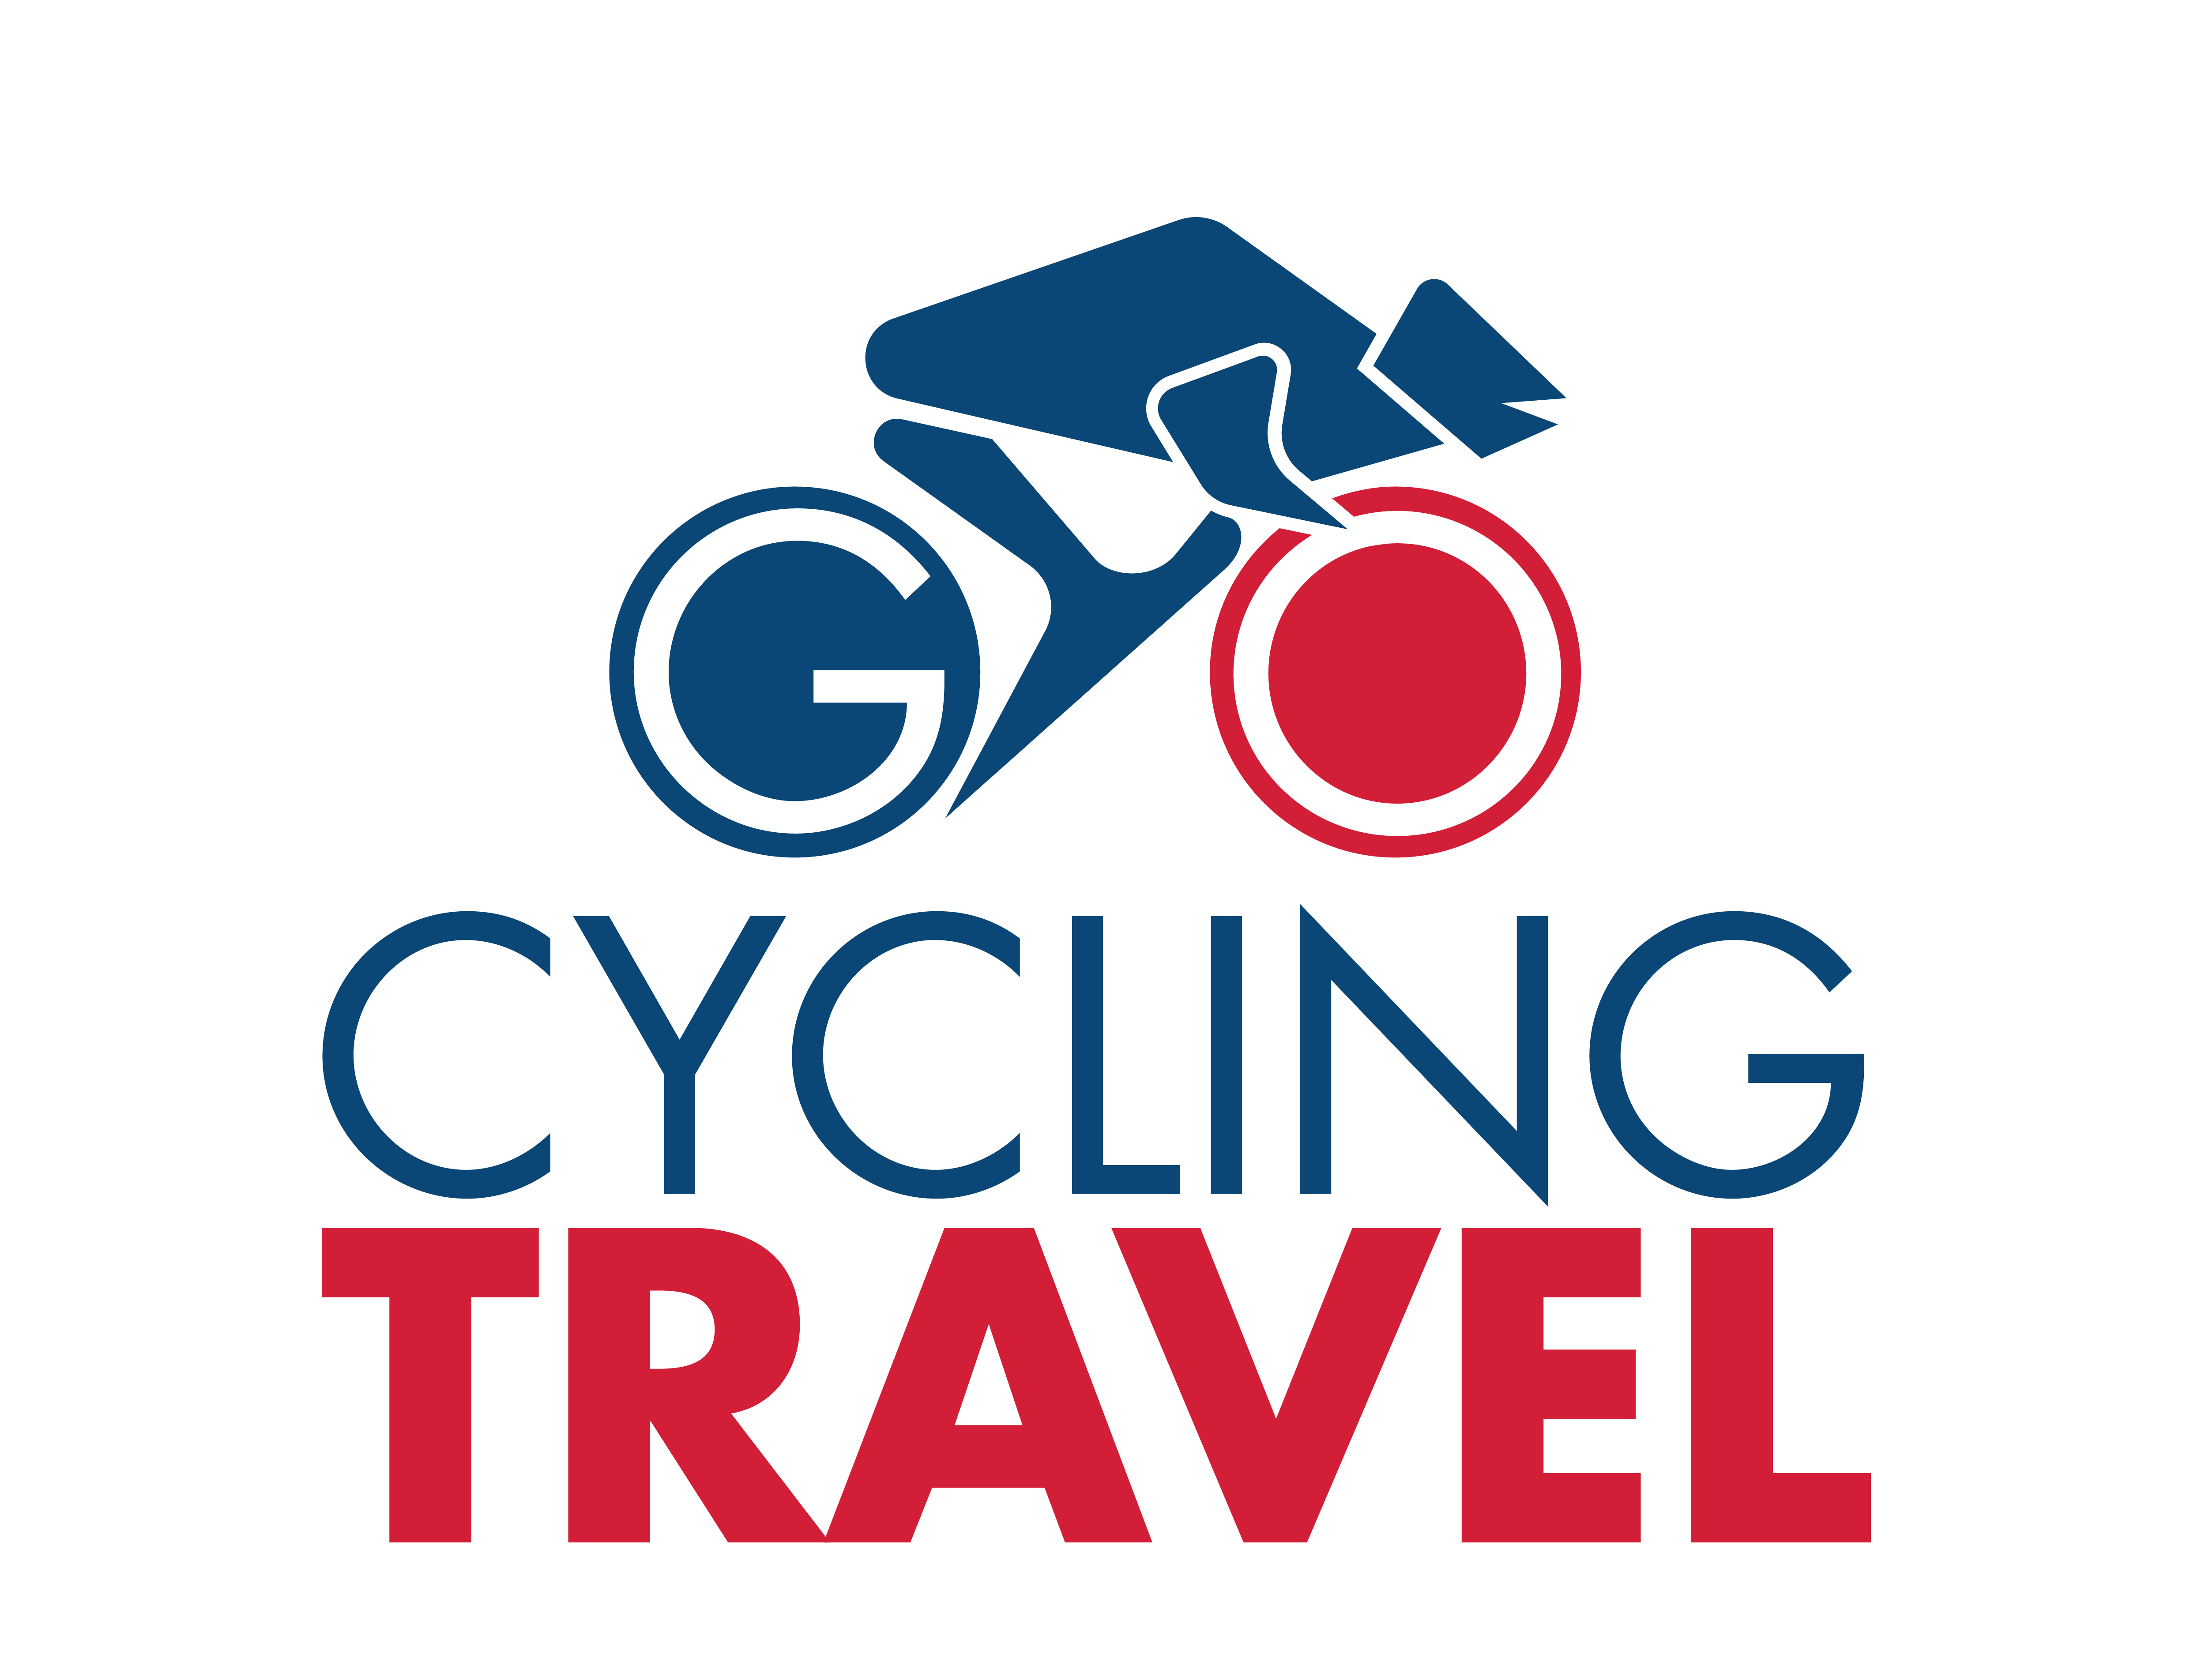 Contact Us - GO CYCLING TRAVEL